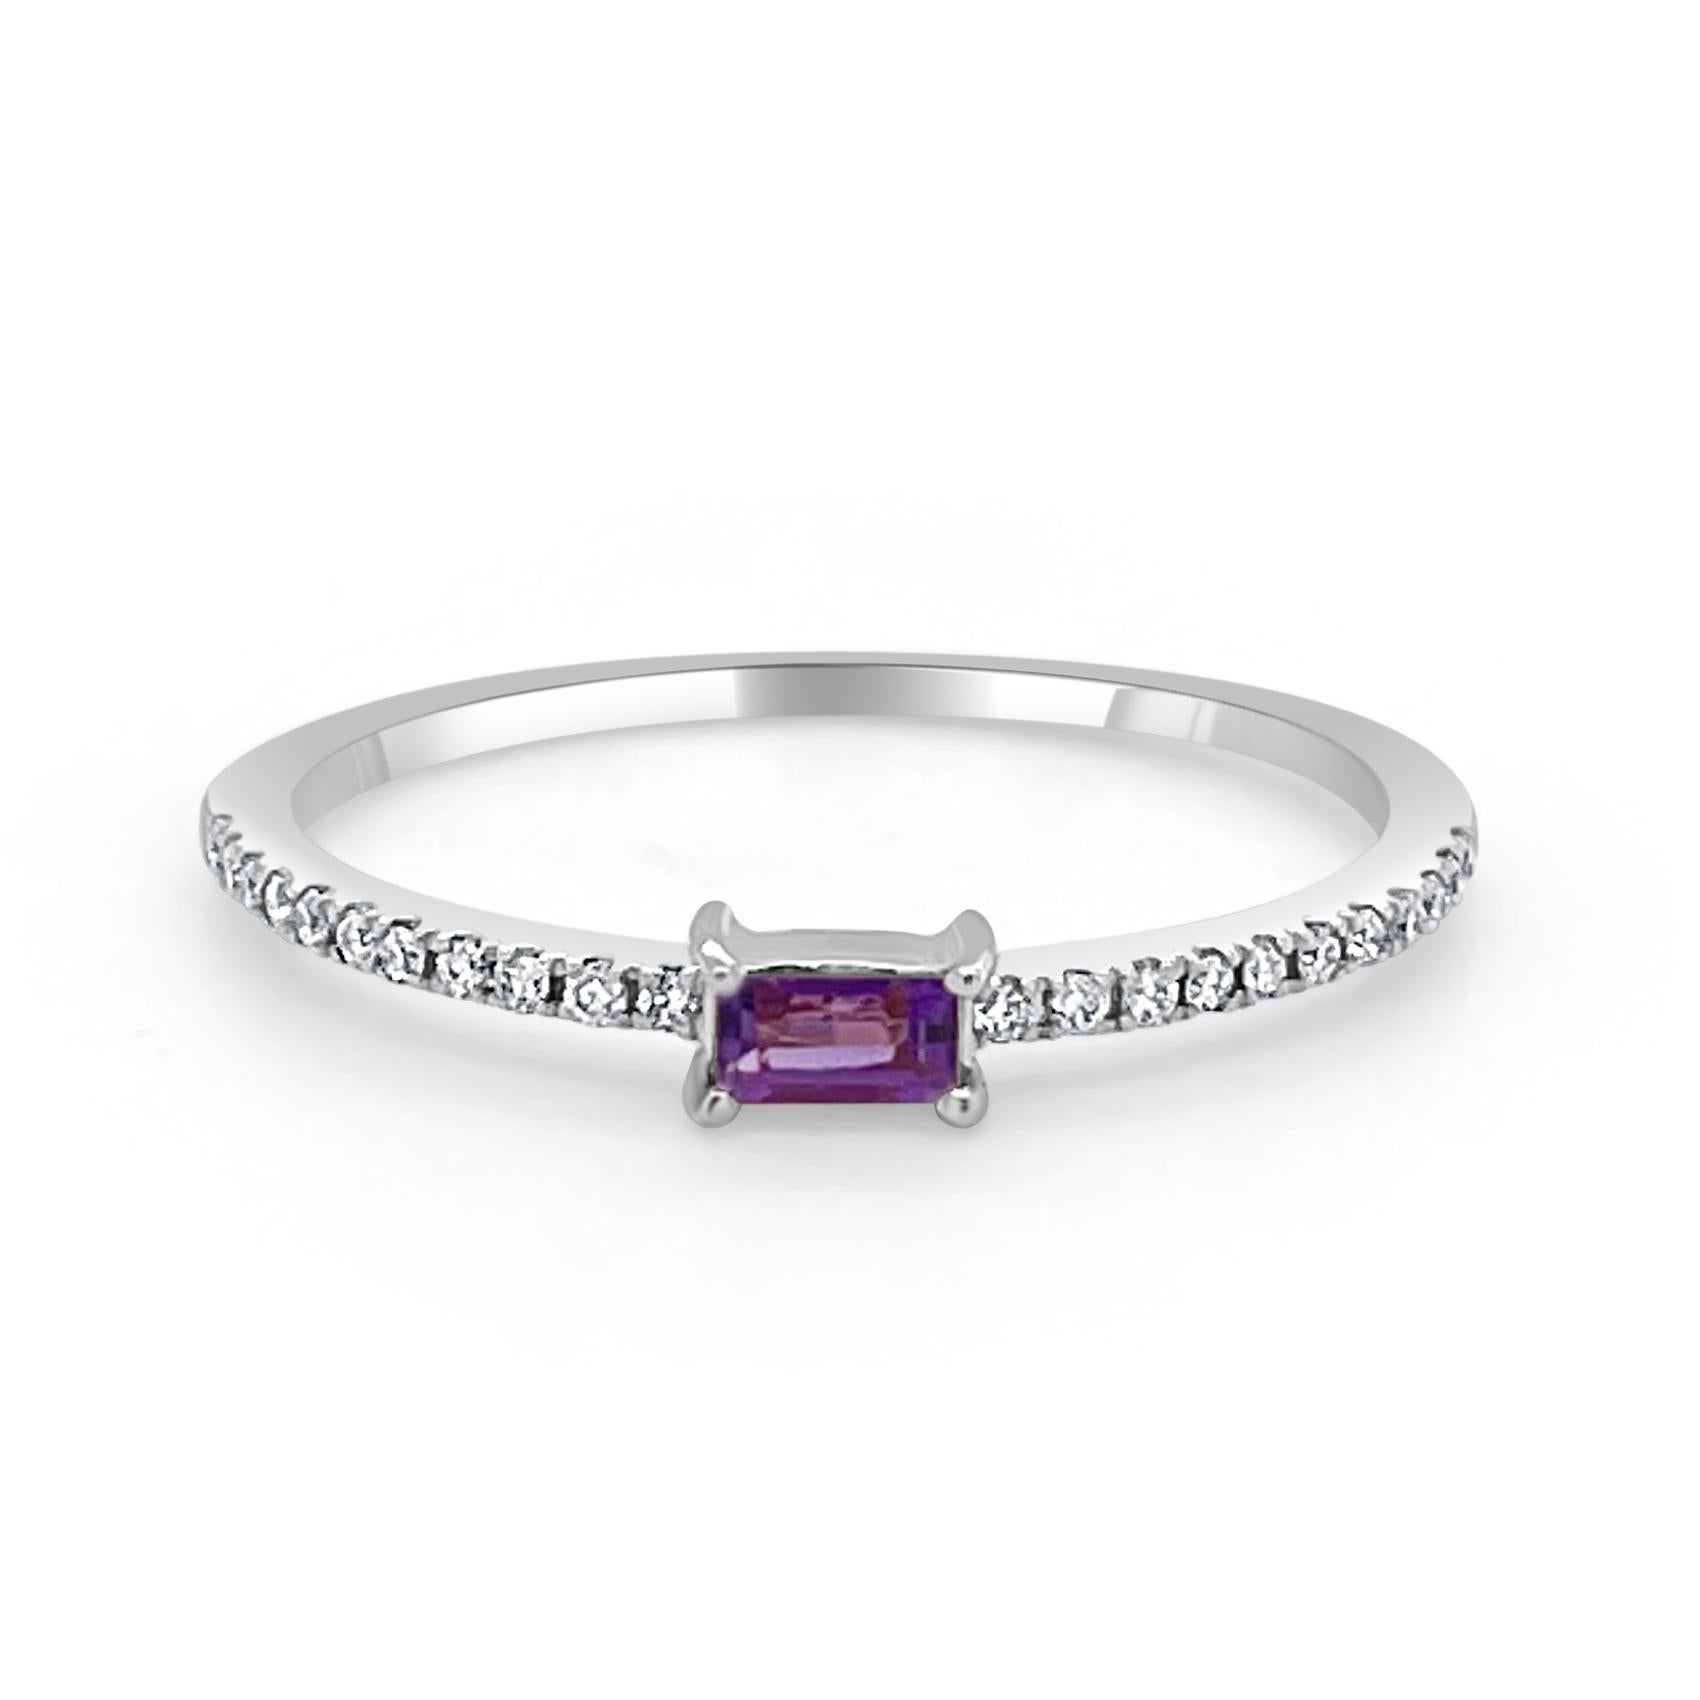 Charming and Elusive Design - This stackable ring features a 14k gold band, a baguette shaped gorgeous purple amethyst approximately 0.14cts, and round diamonds approximately 0.09 cts, 
Measurements for ring size: The finger Size of the ring is 6.5